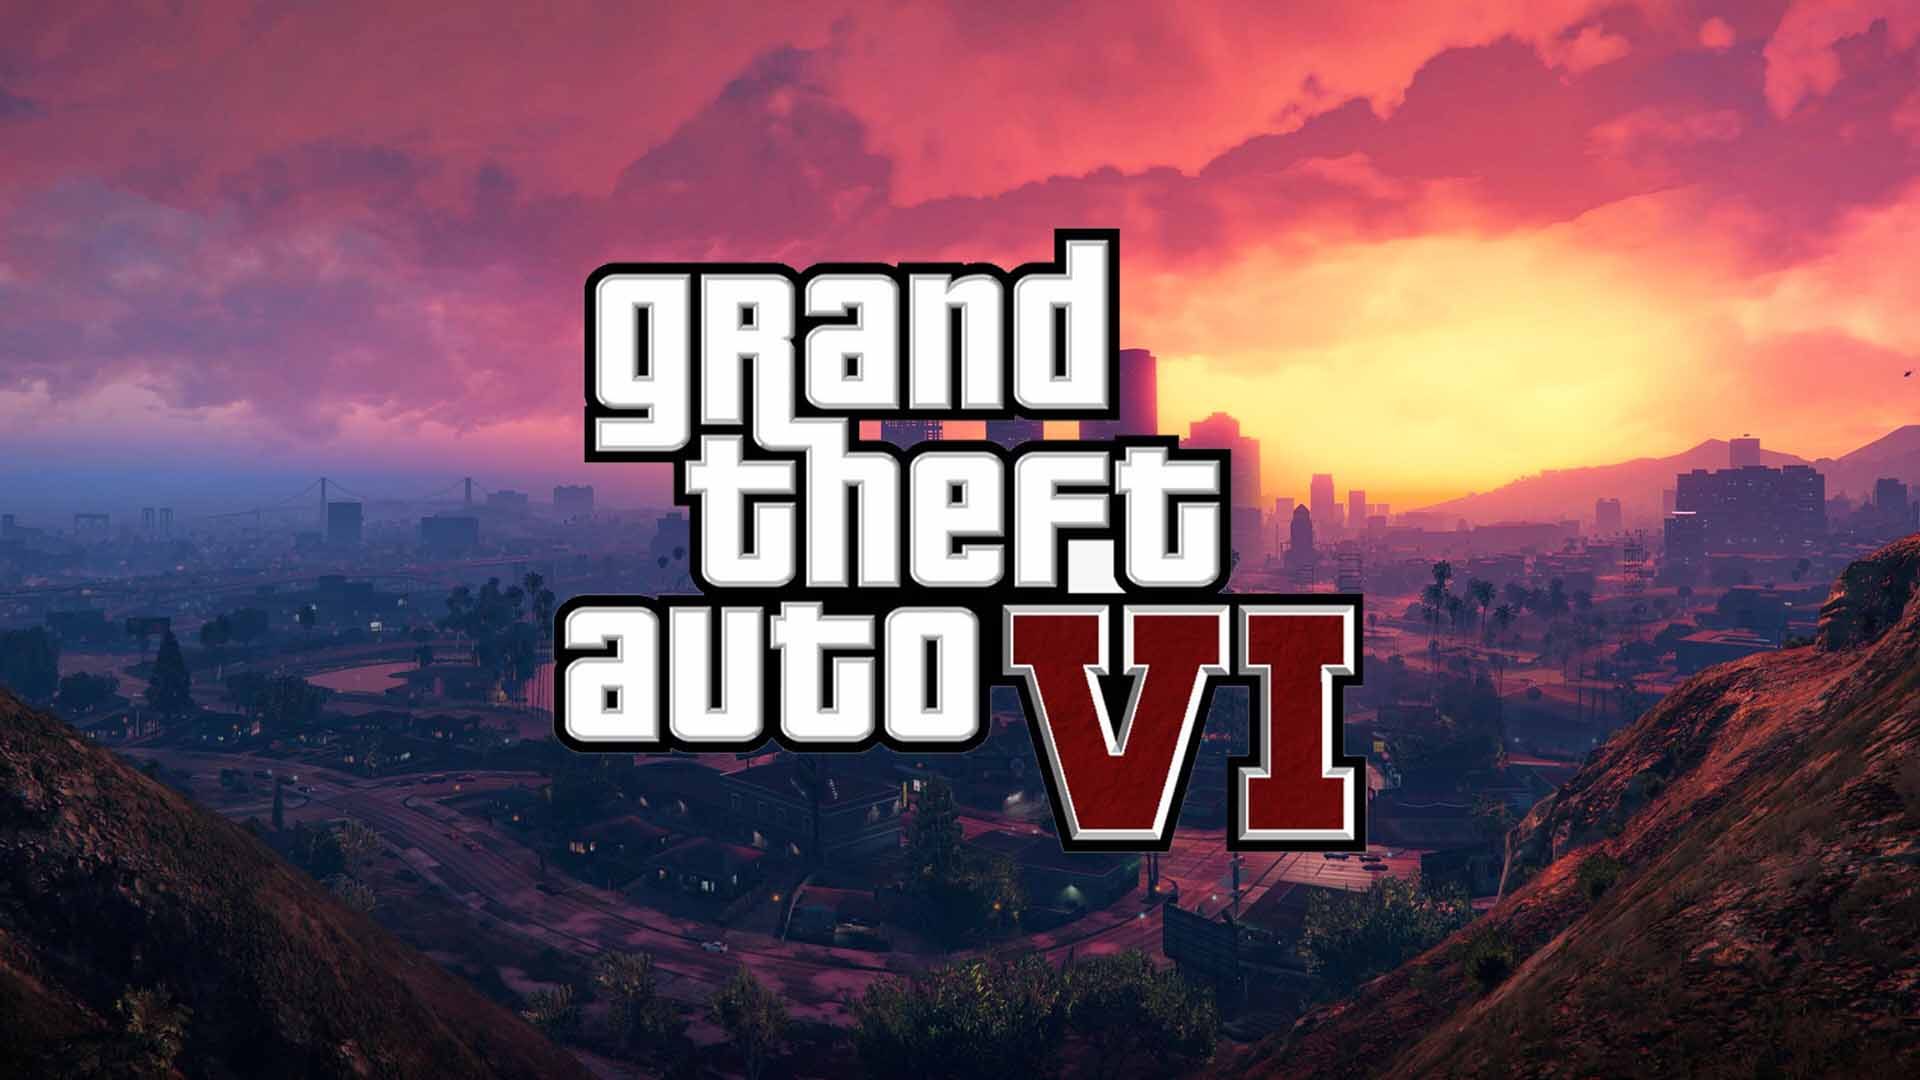 GTA VI: new information leaks for the next Grand Theft Auto 6